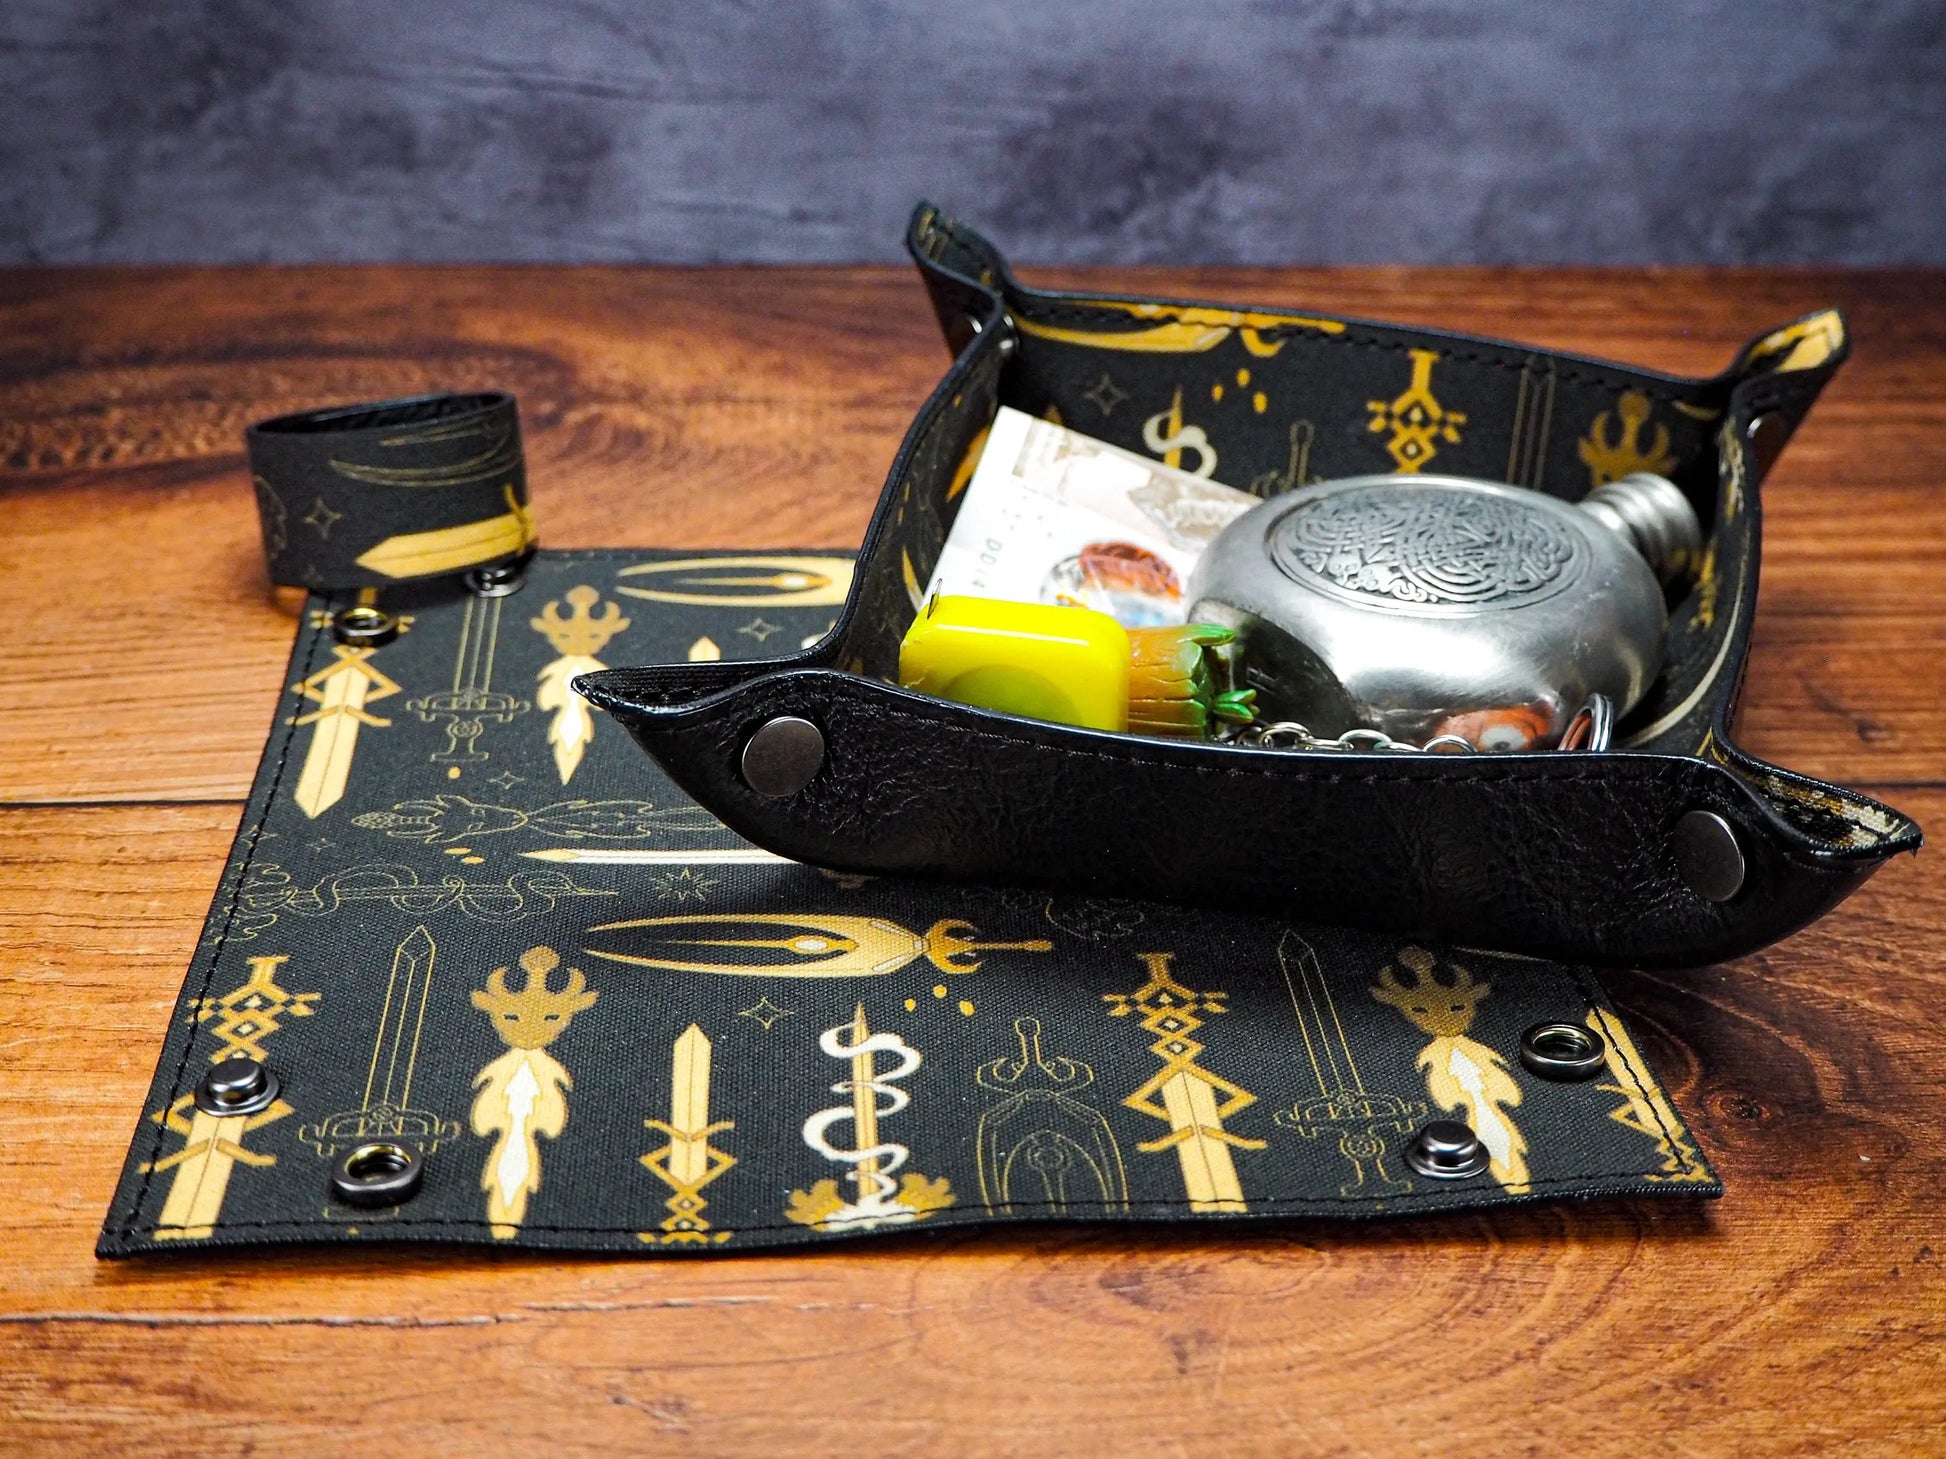 Swords Canvas Dice and Leather Dice Tray - Collapsible Leather Dice Tray a fantastic DnD Gift for Role Playing Games EmBrace Leather